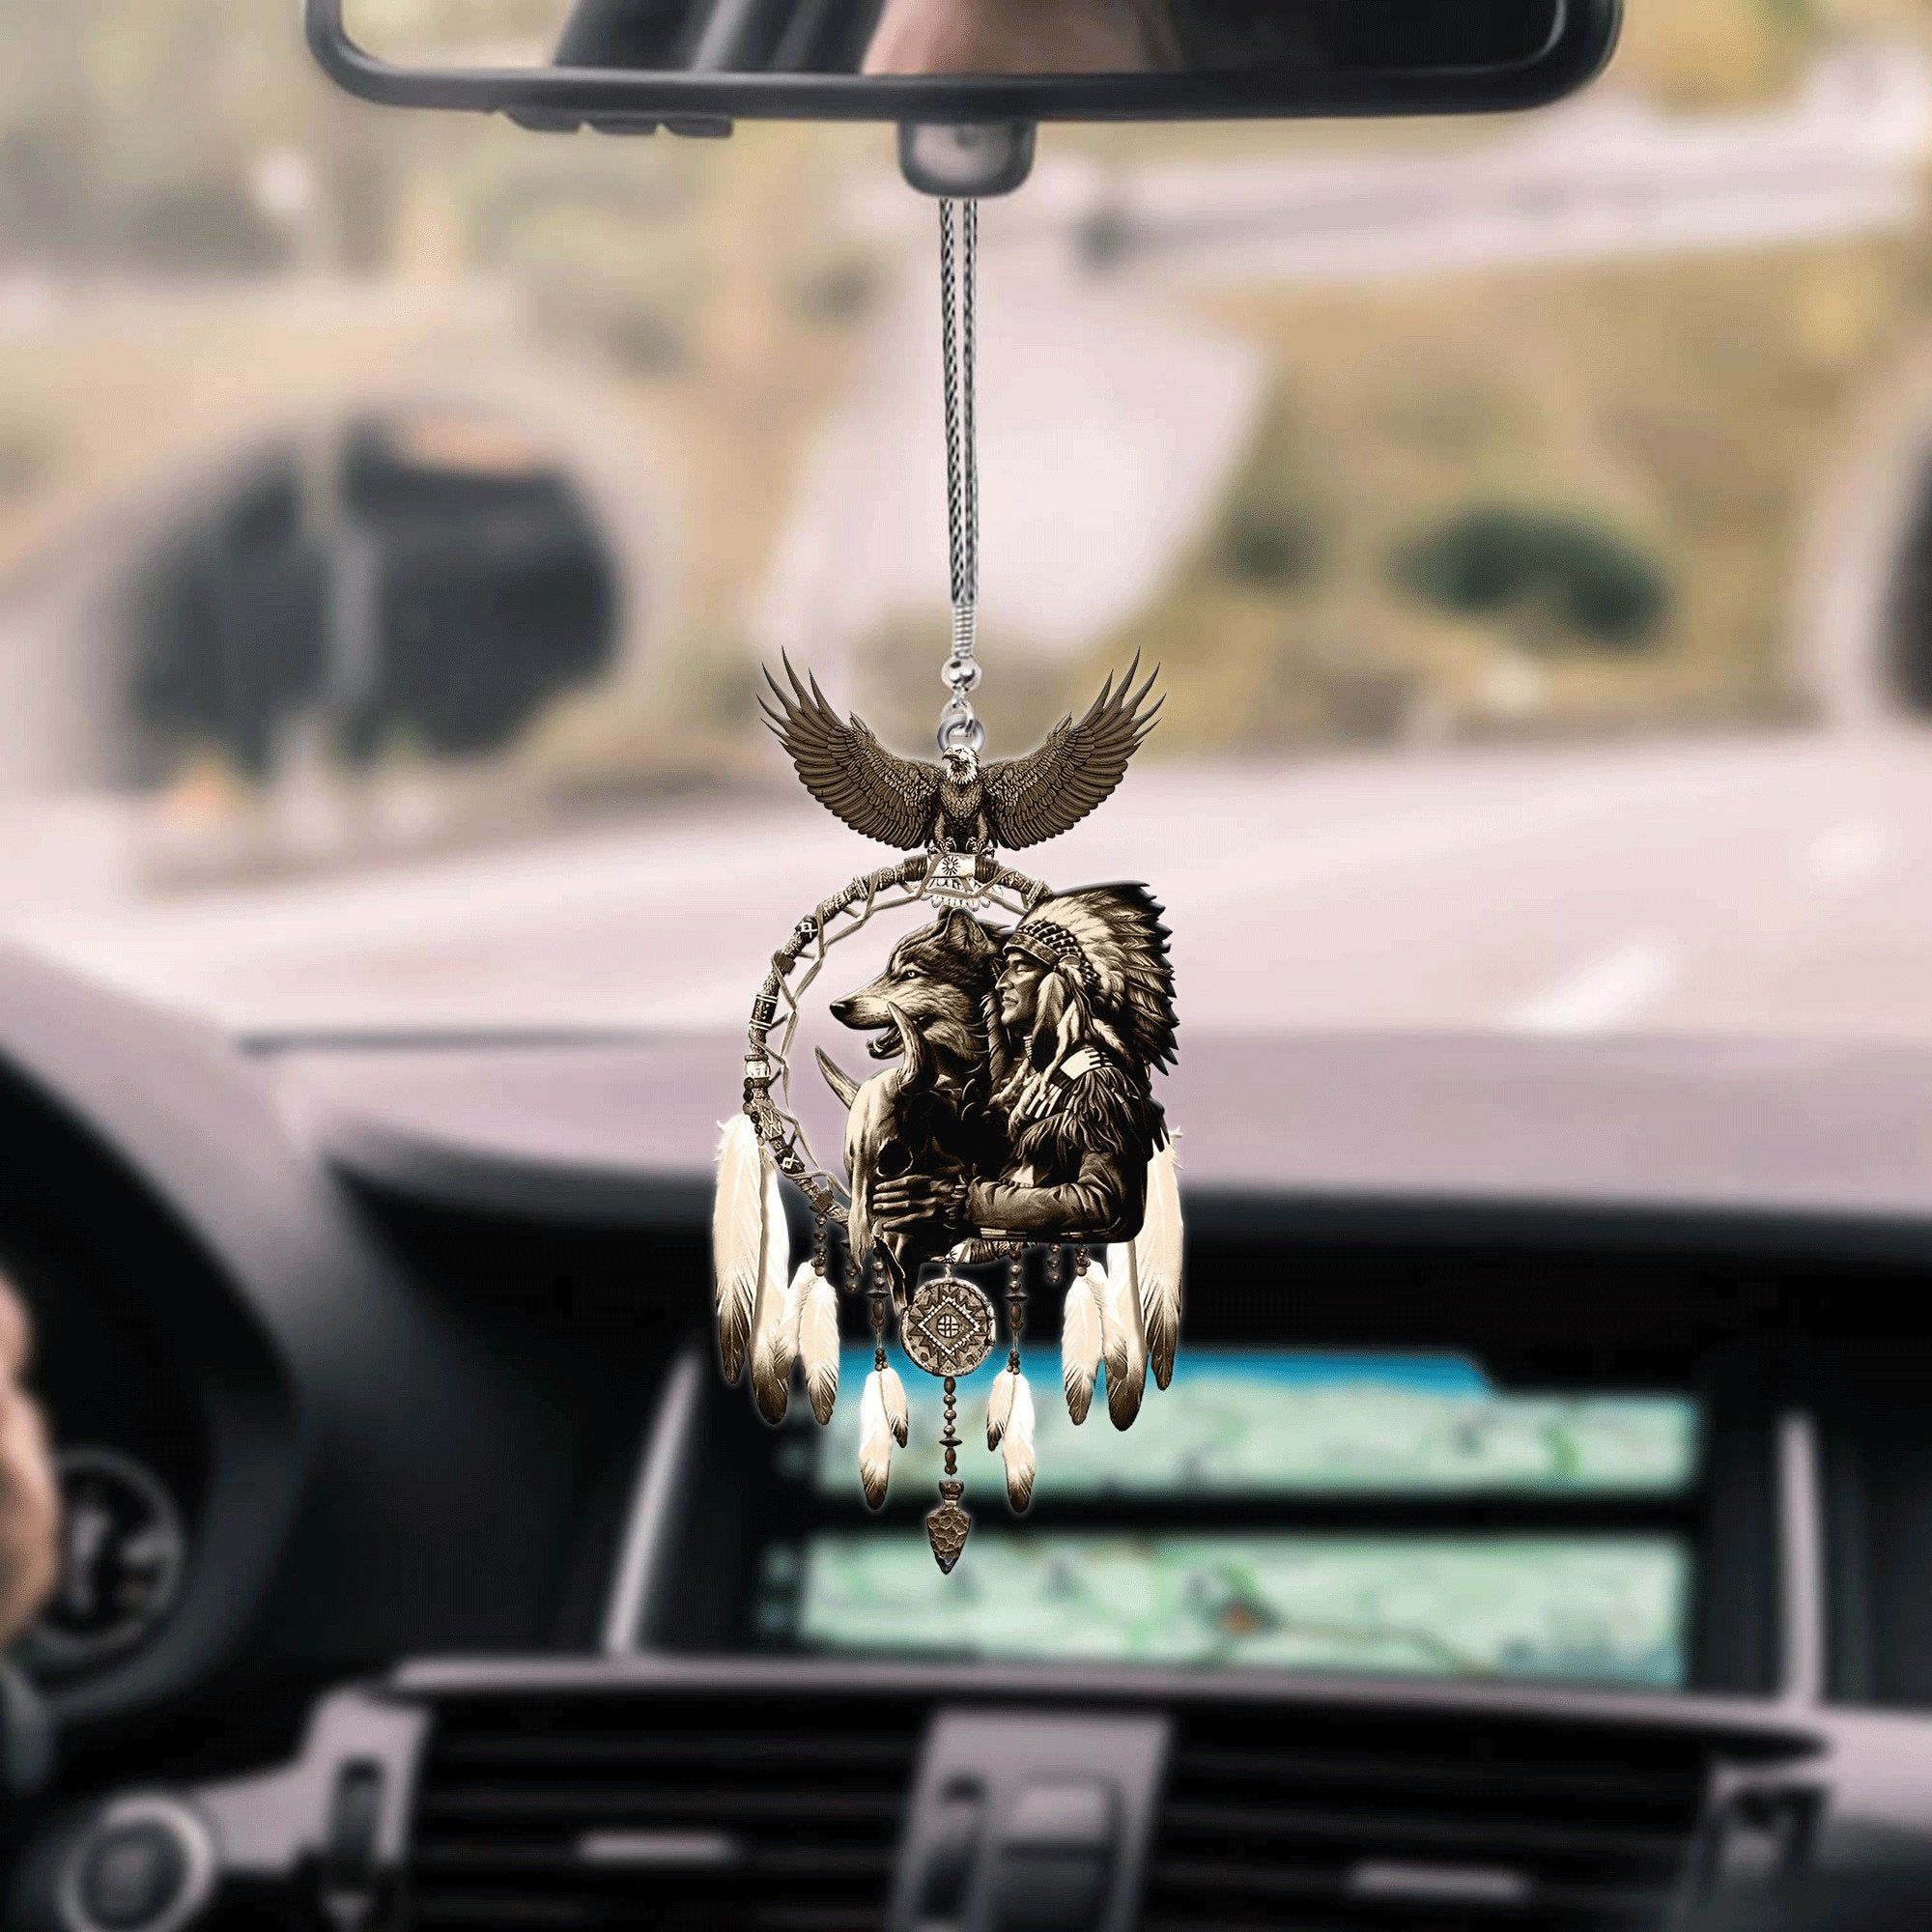 Cool Native American Hanging Ornament For Car/ Native American Car Accessories Interior